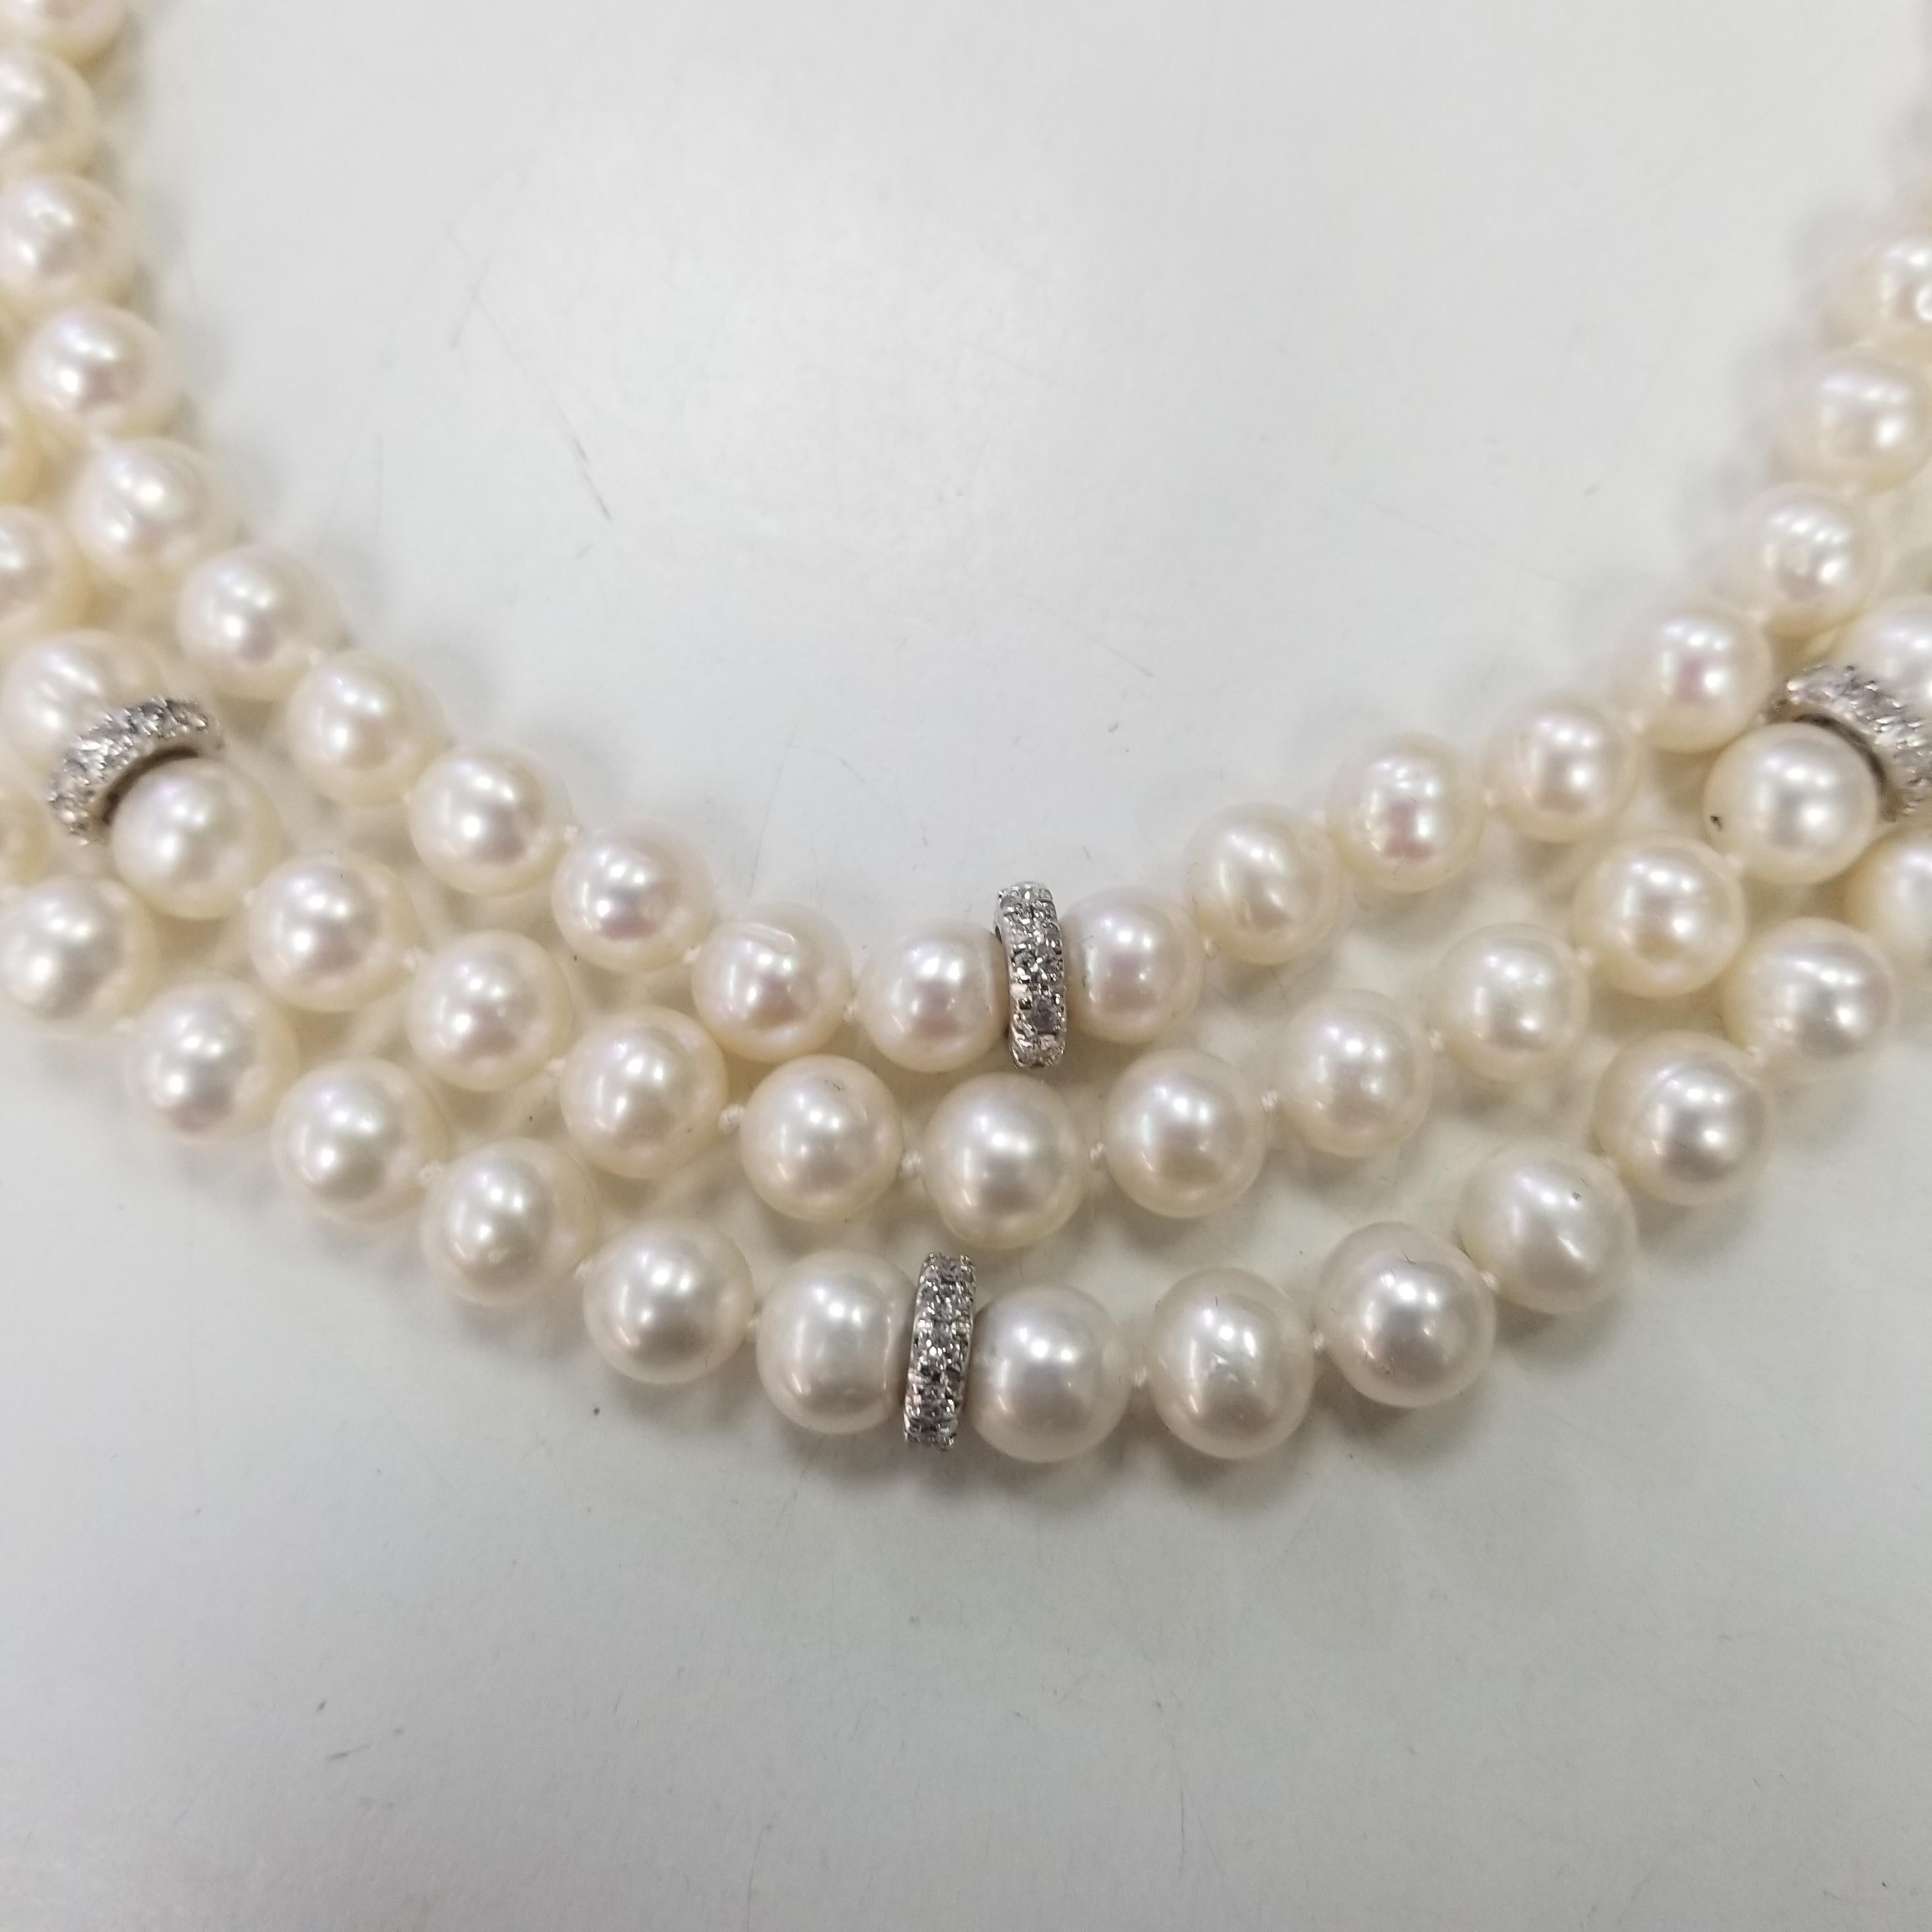 3 strand pearl necklace